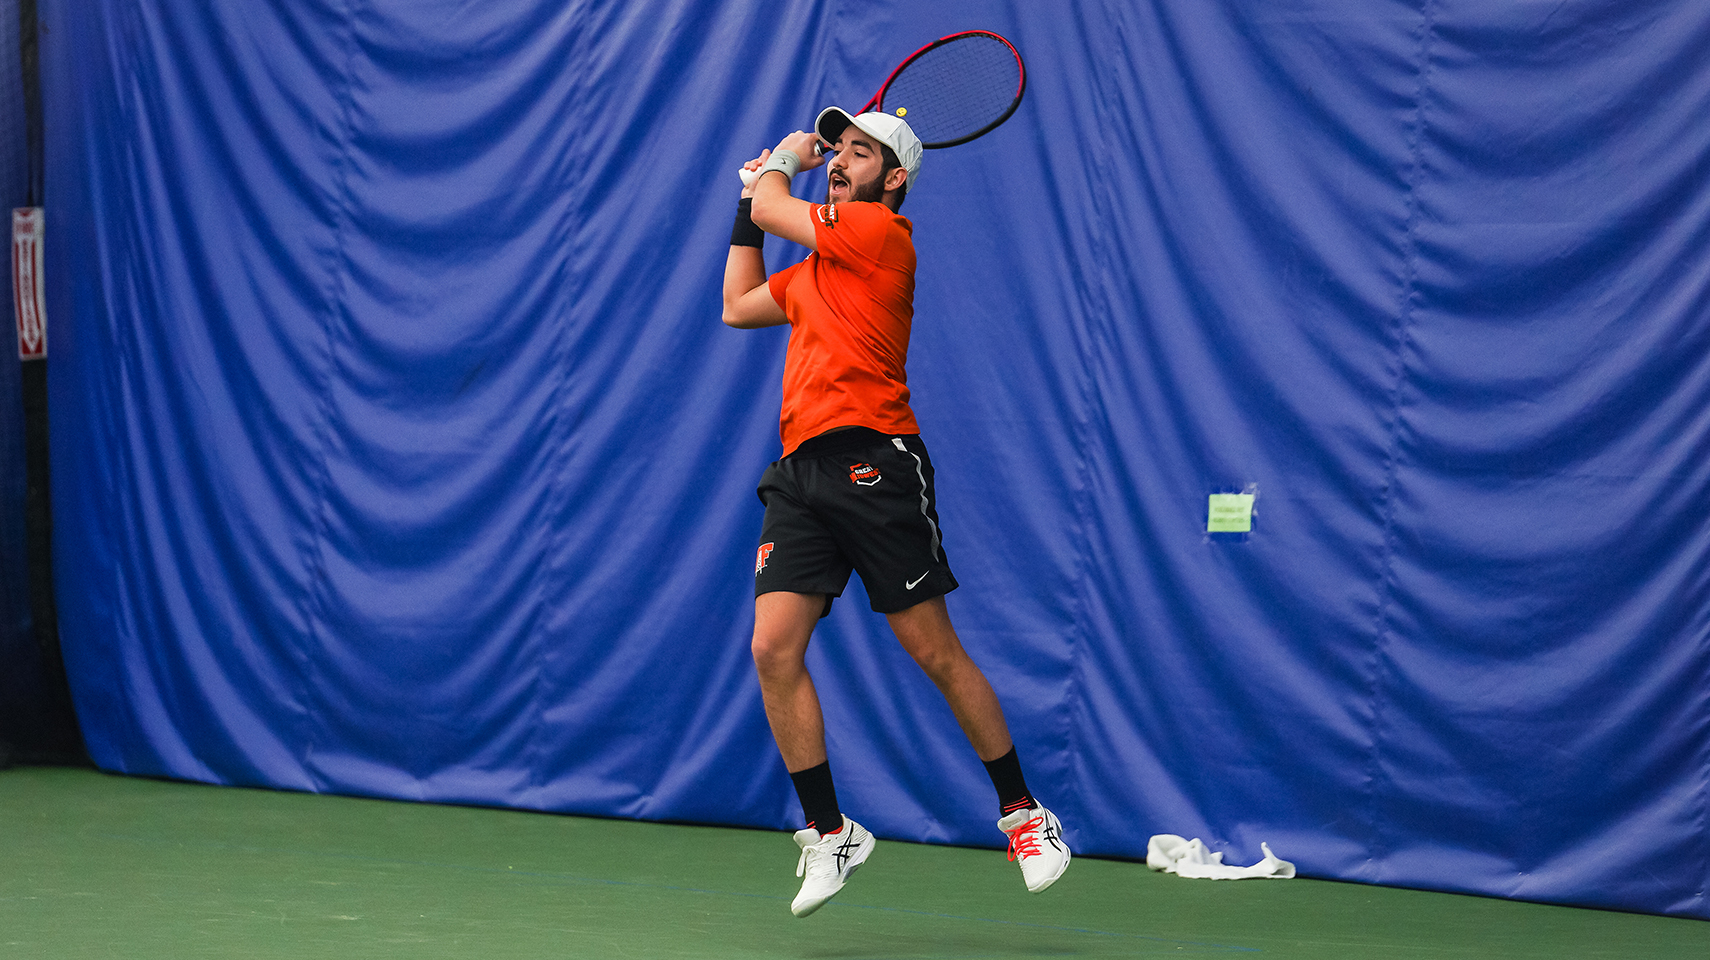 men's tennis player hitting the ball in front of blue drape